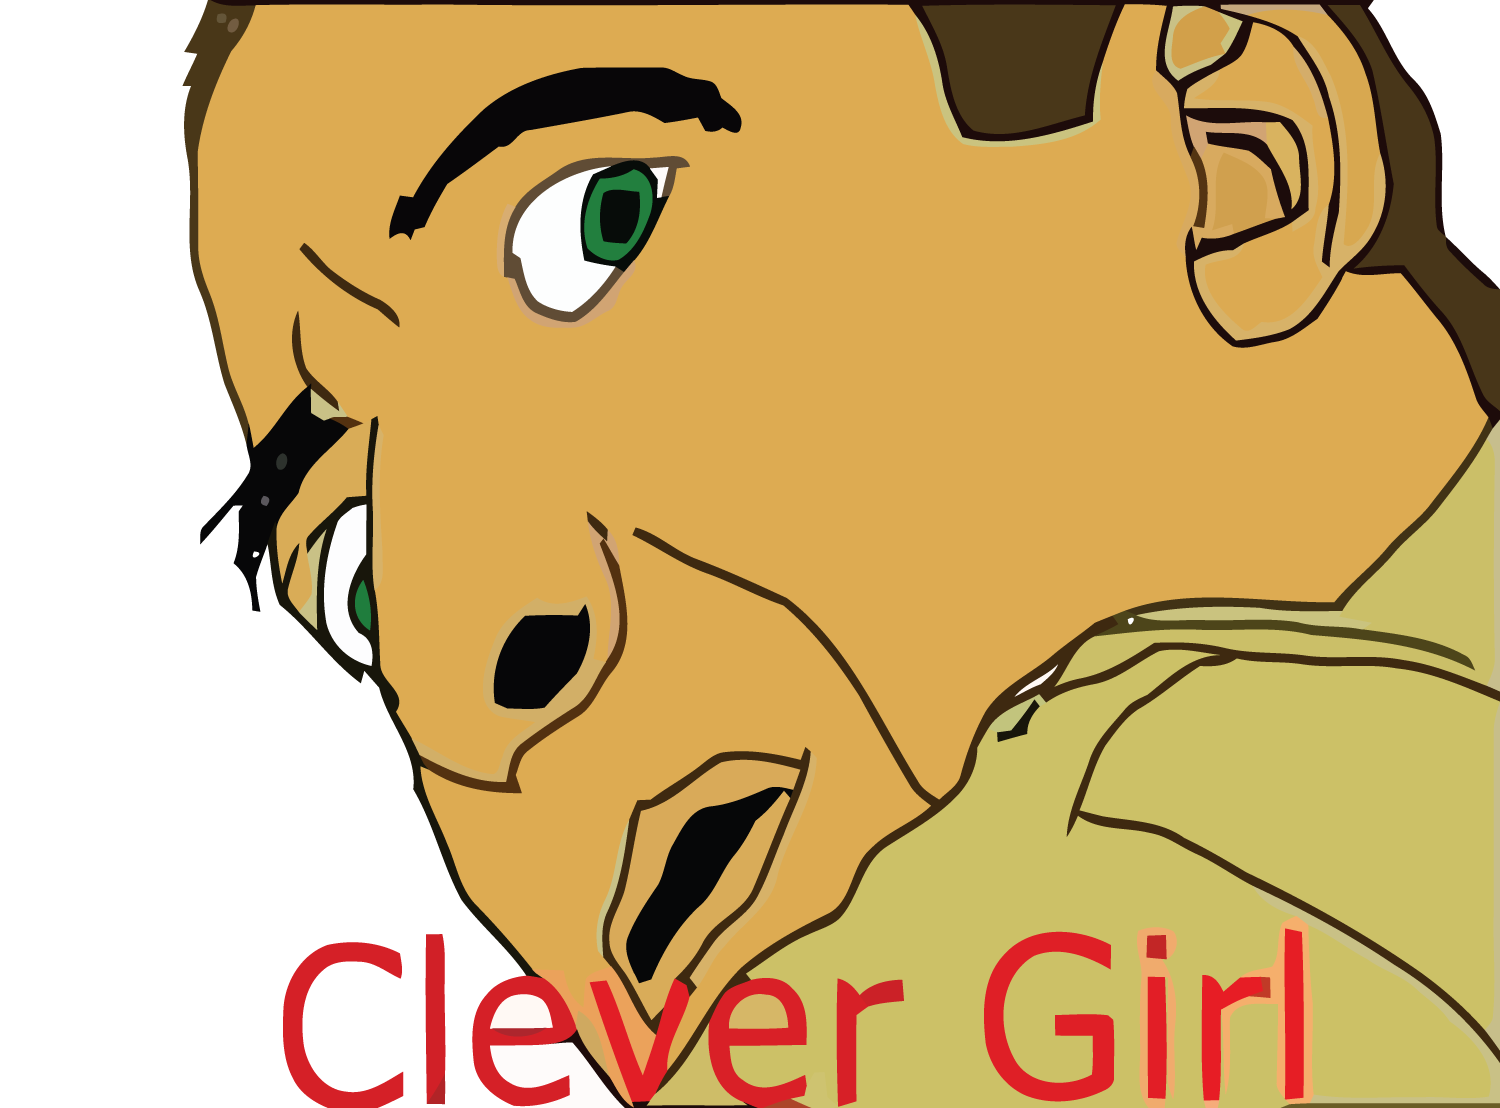 Clever-Girl-Meme-Template-Blank.png